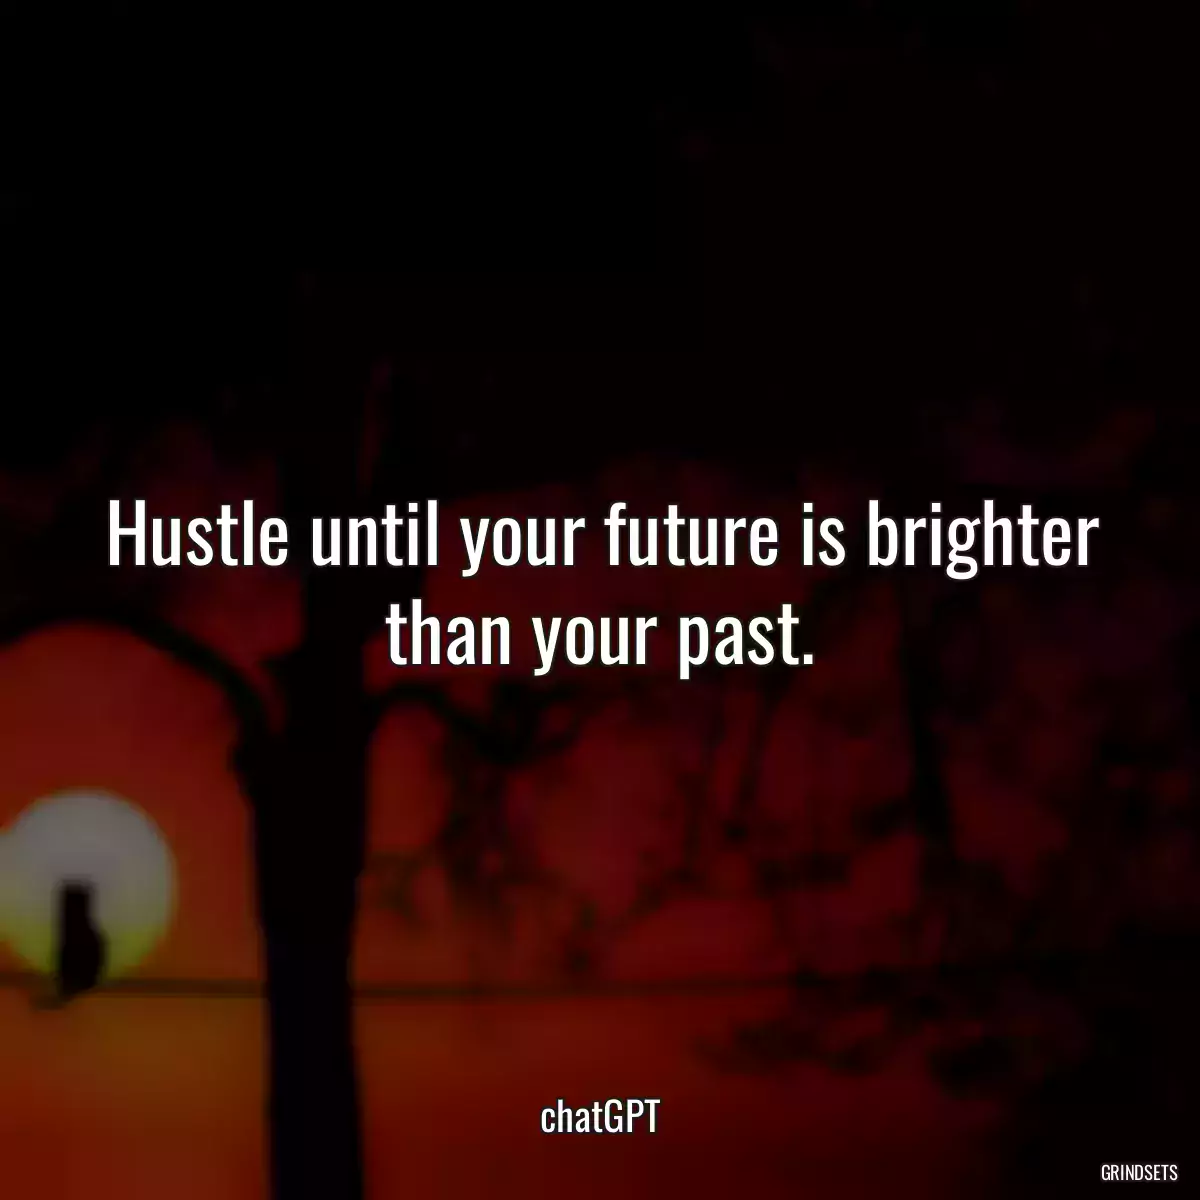 Hustle until your future is brighter than your past.